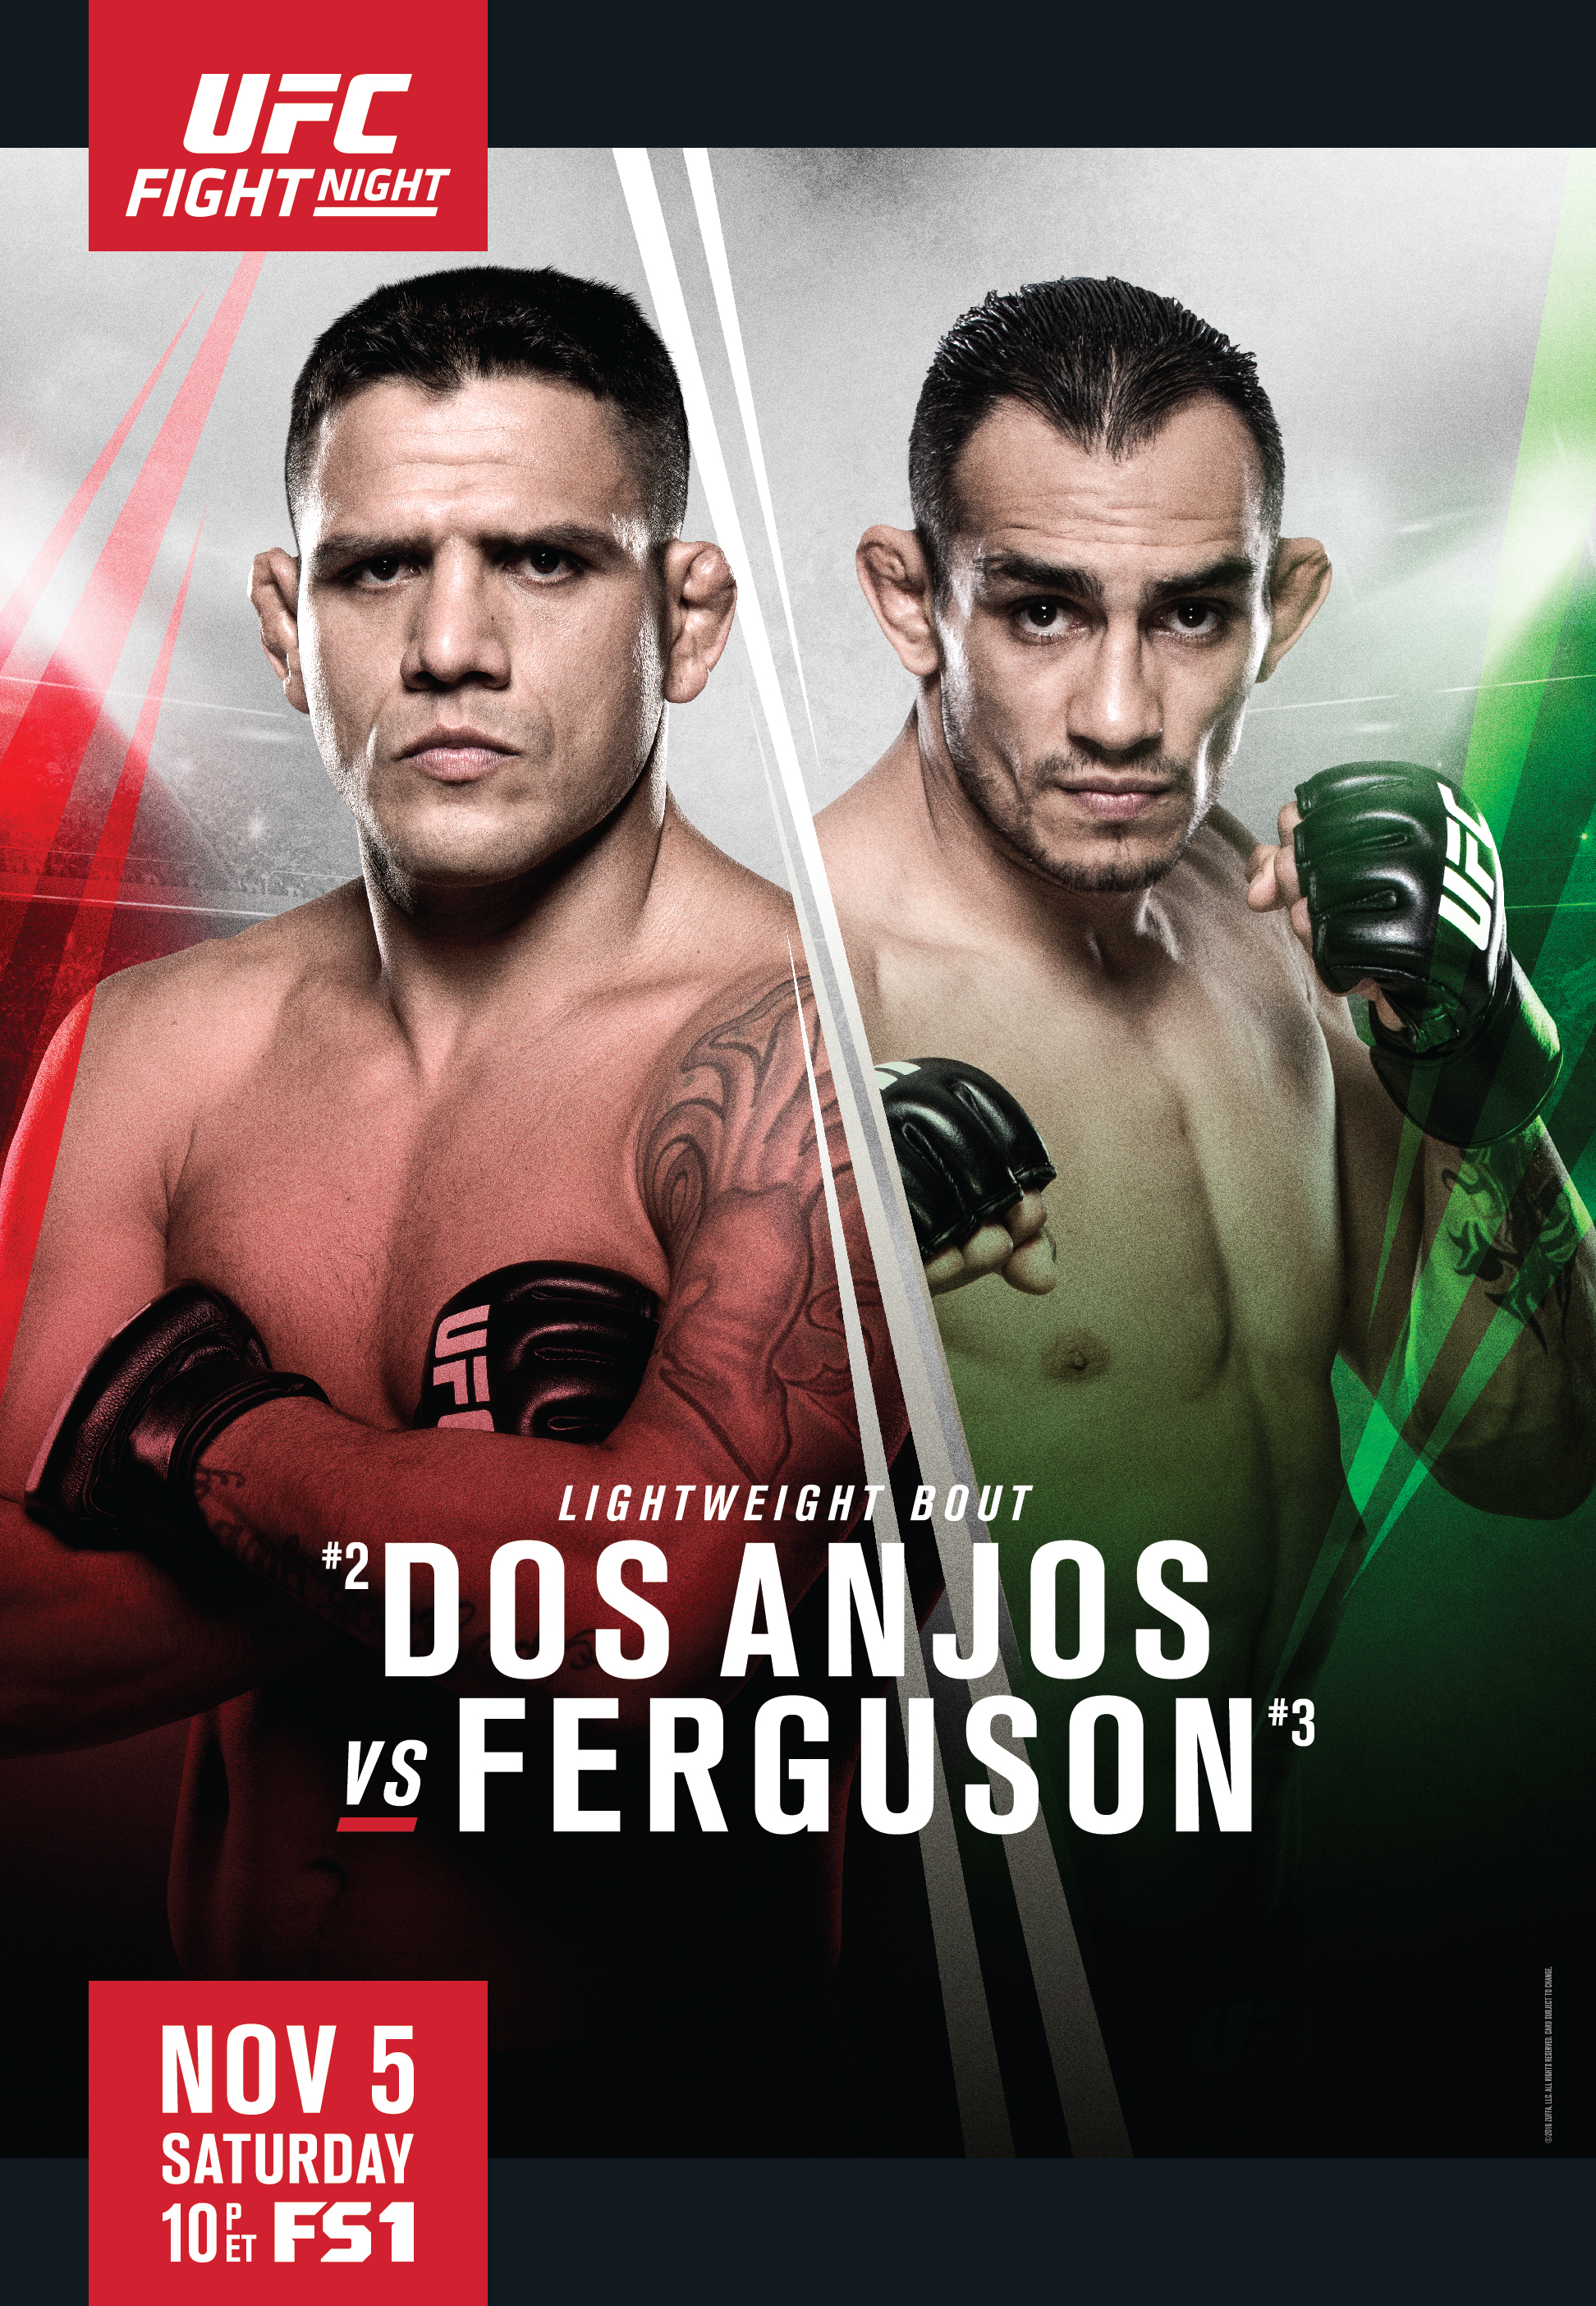 Marcin Held takes on Diego Sanchez in the co-main event at Fight Night Mexico City